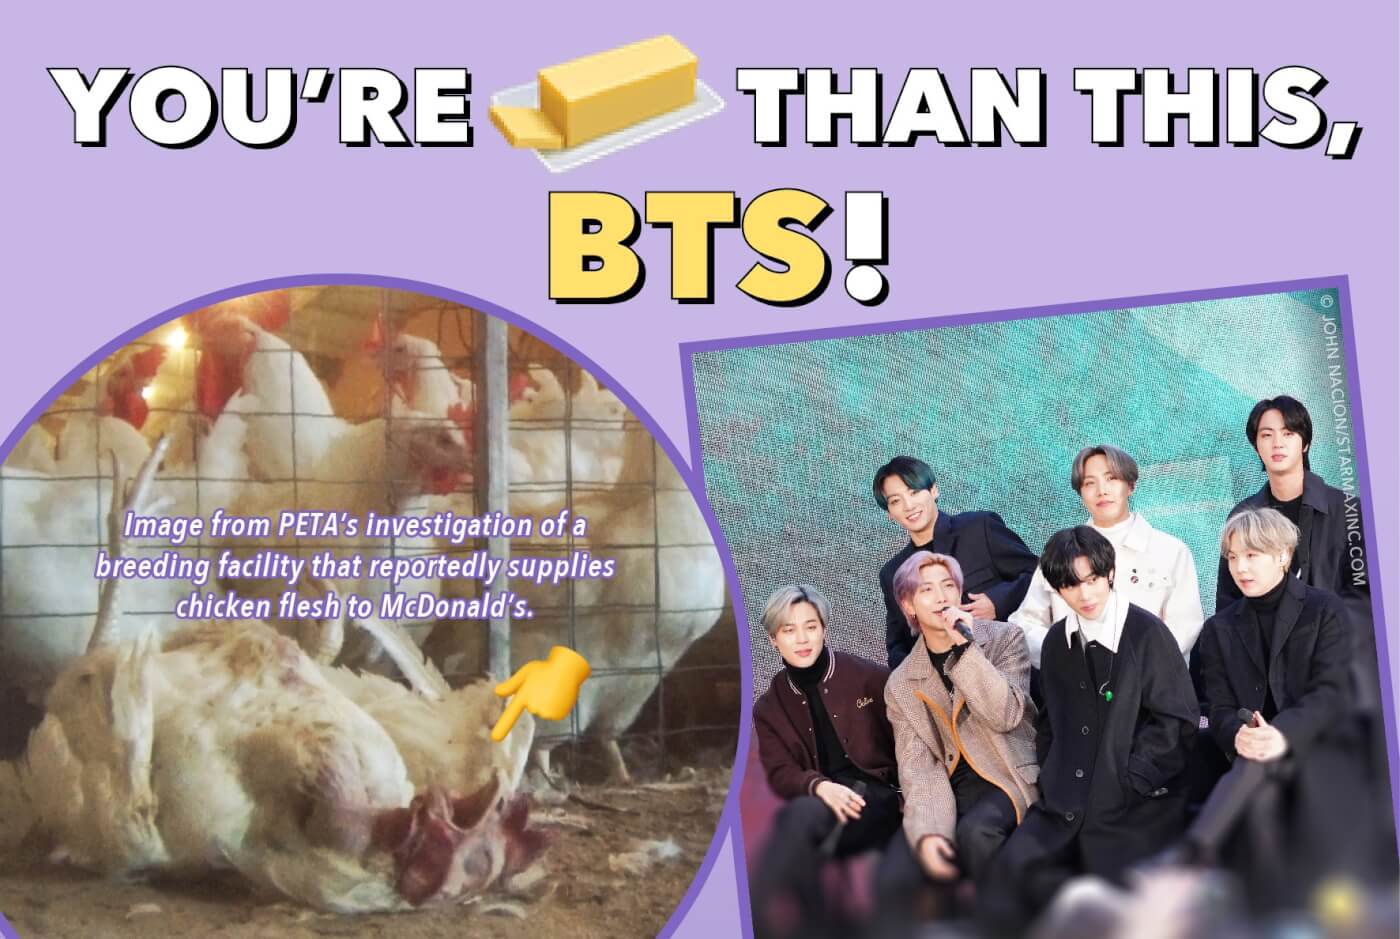 You’re Butter Than This, BTS! Stop Promoting Dead Chickens